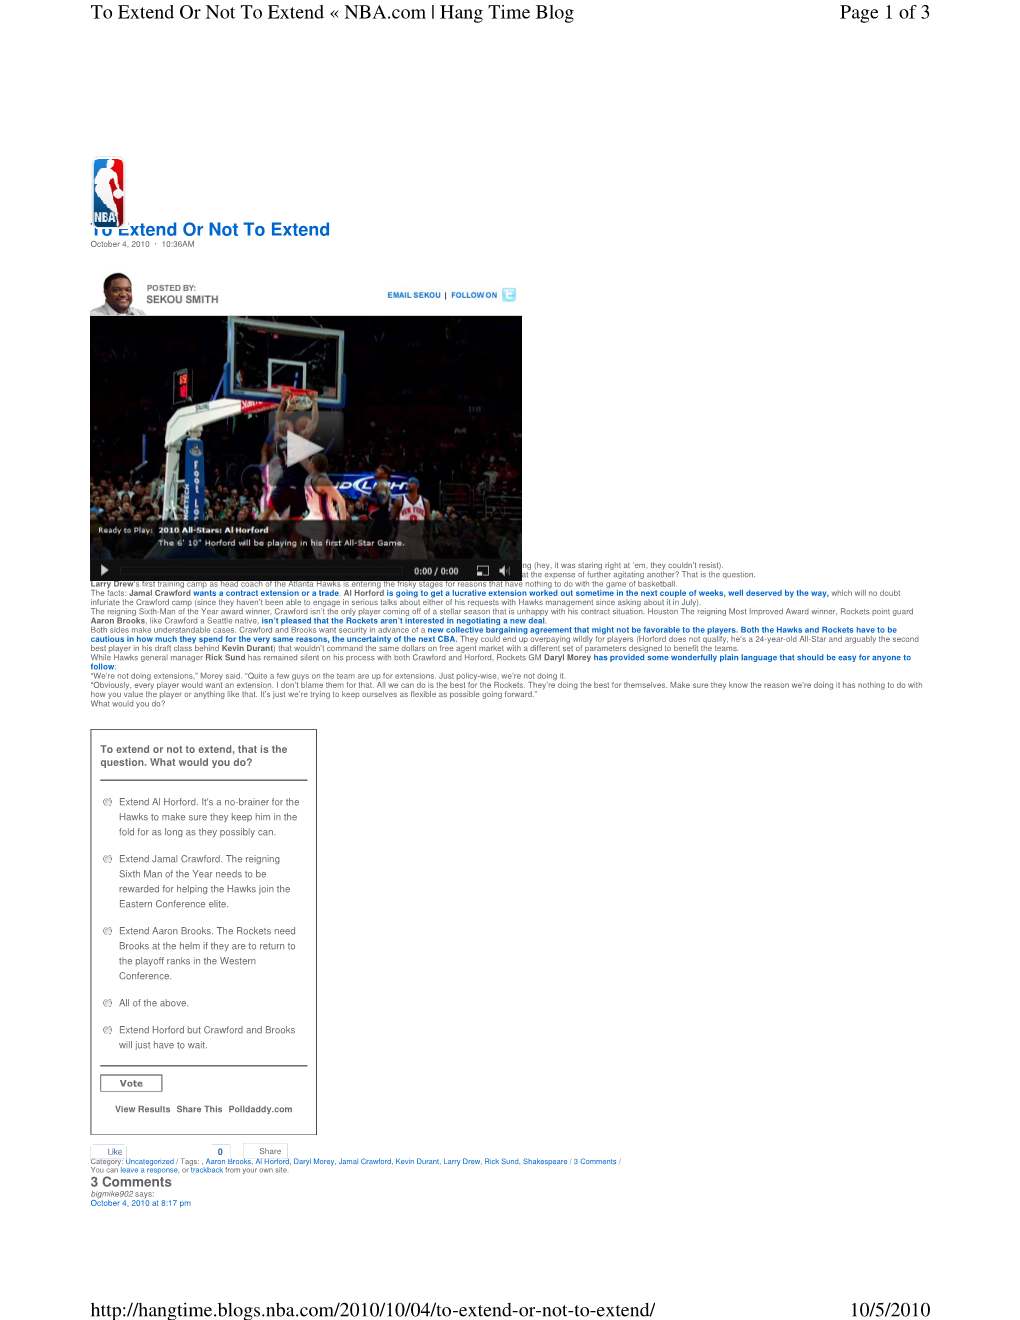 Page 1 of 3 to Extend Or Not to Extend « NBA.Com | Hang Time